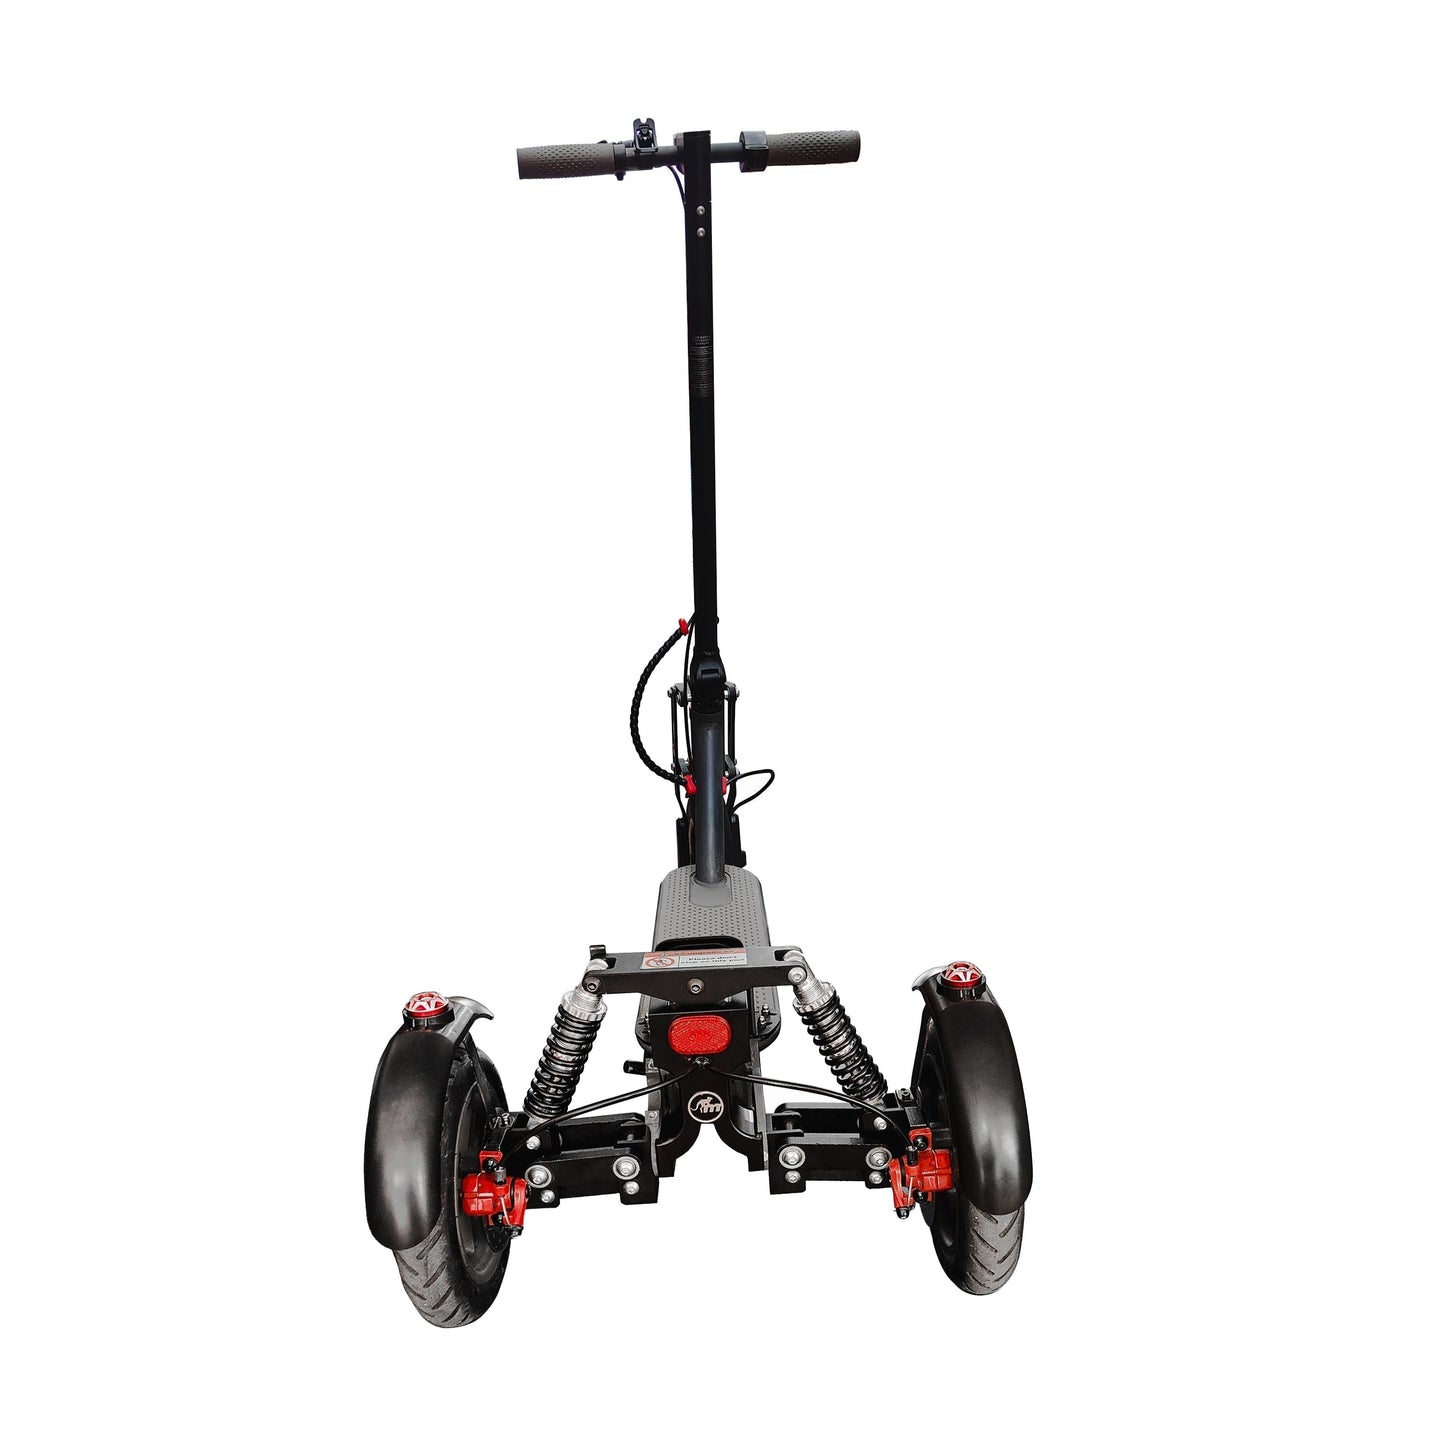 Monorim X3 upgrade kit to be Three wheels special for xiaomi pro Scooter